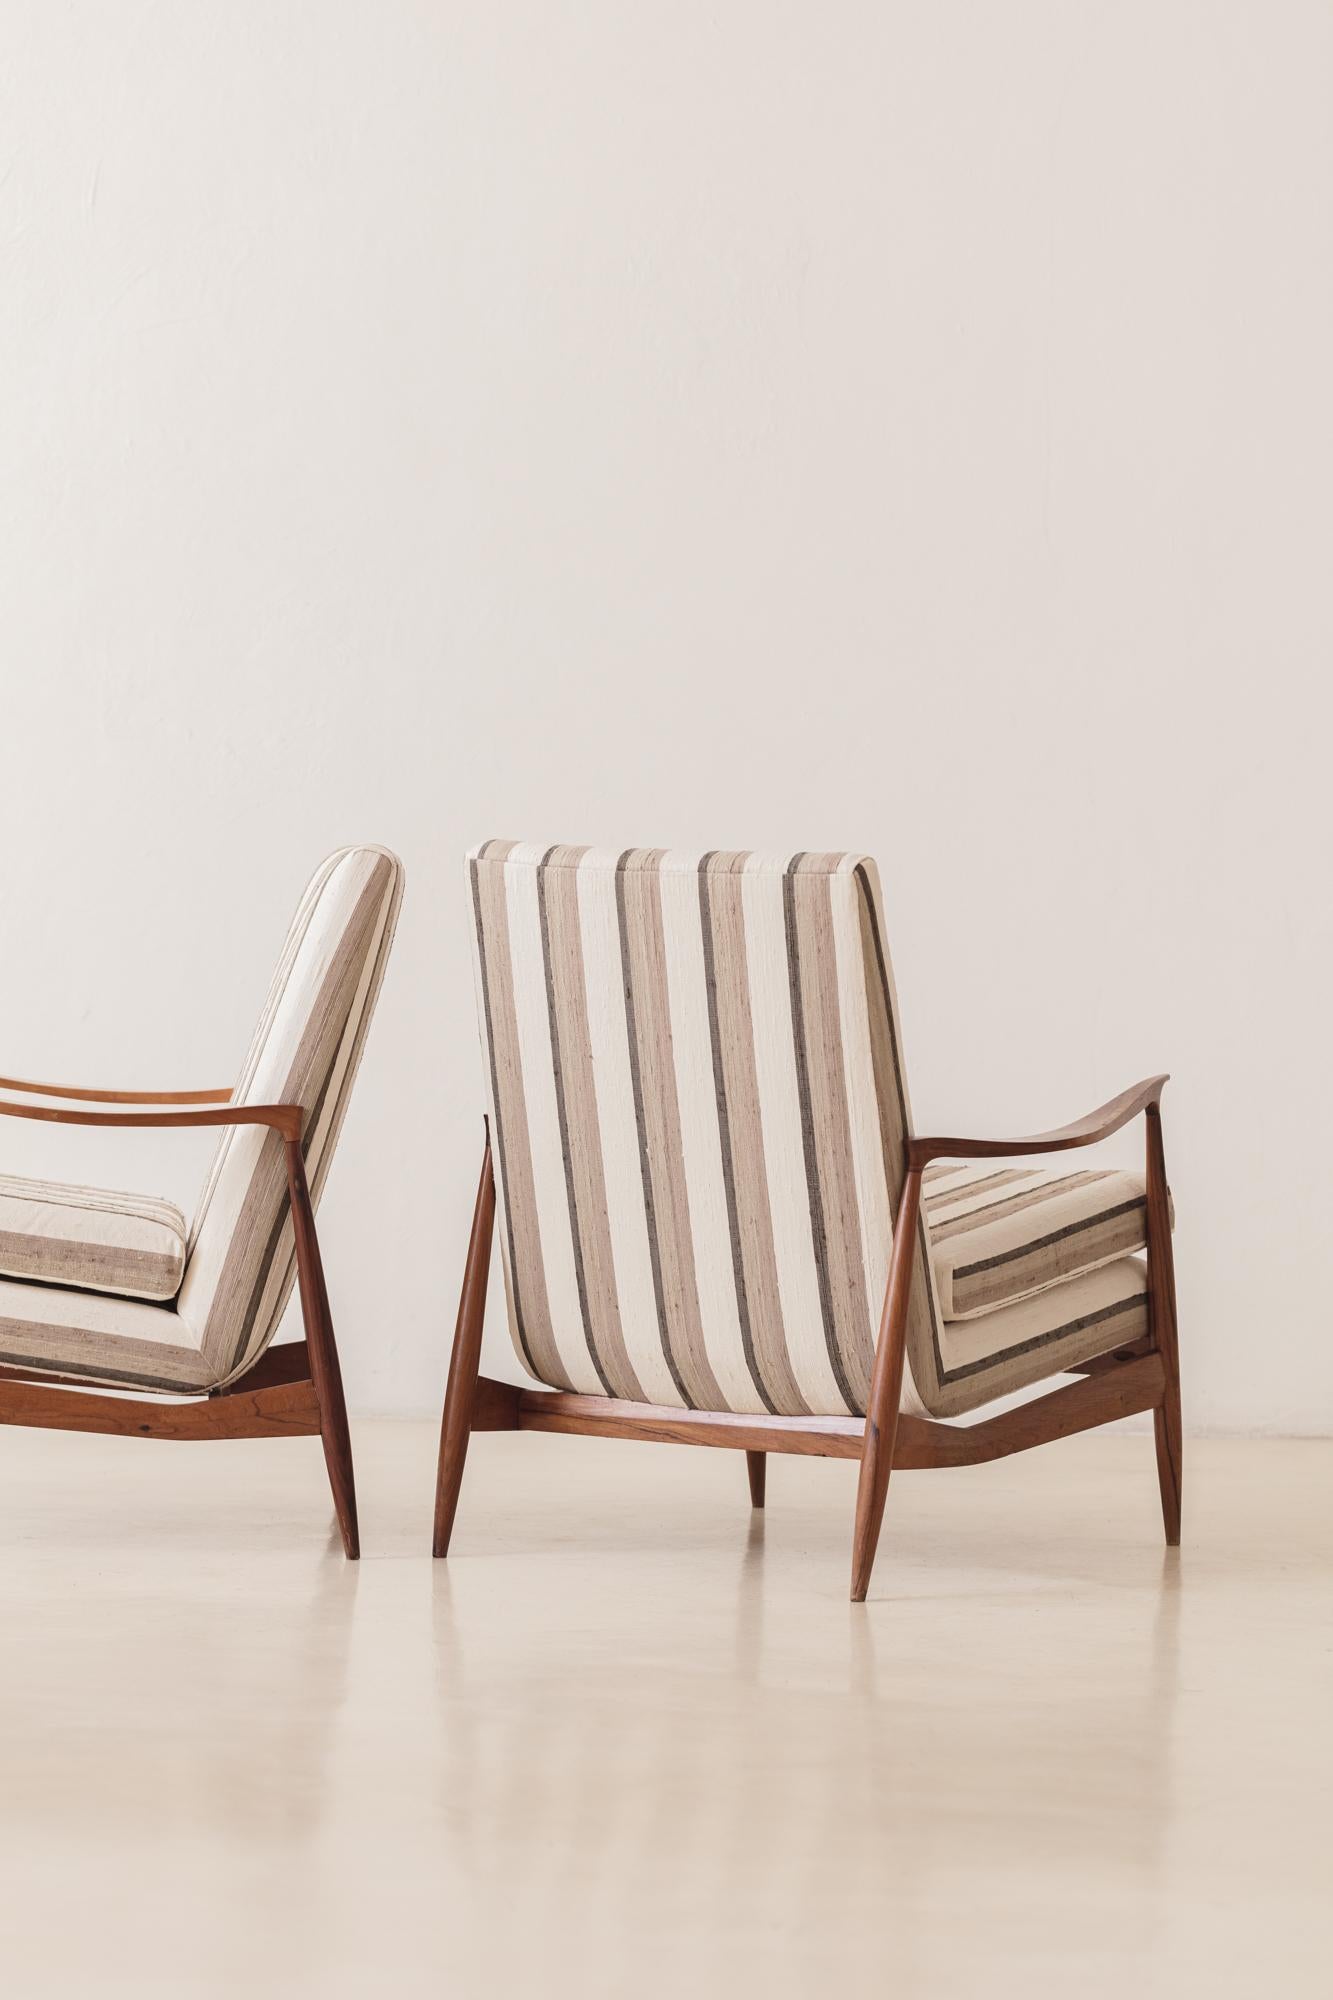 Pair of Vintage Armchairs by Móveis Cimo, 1960s, Brazilian Mid-Century For Sale 1